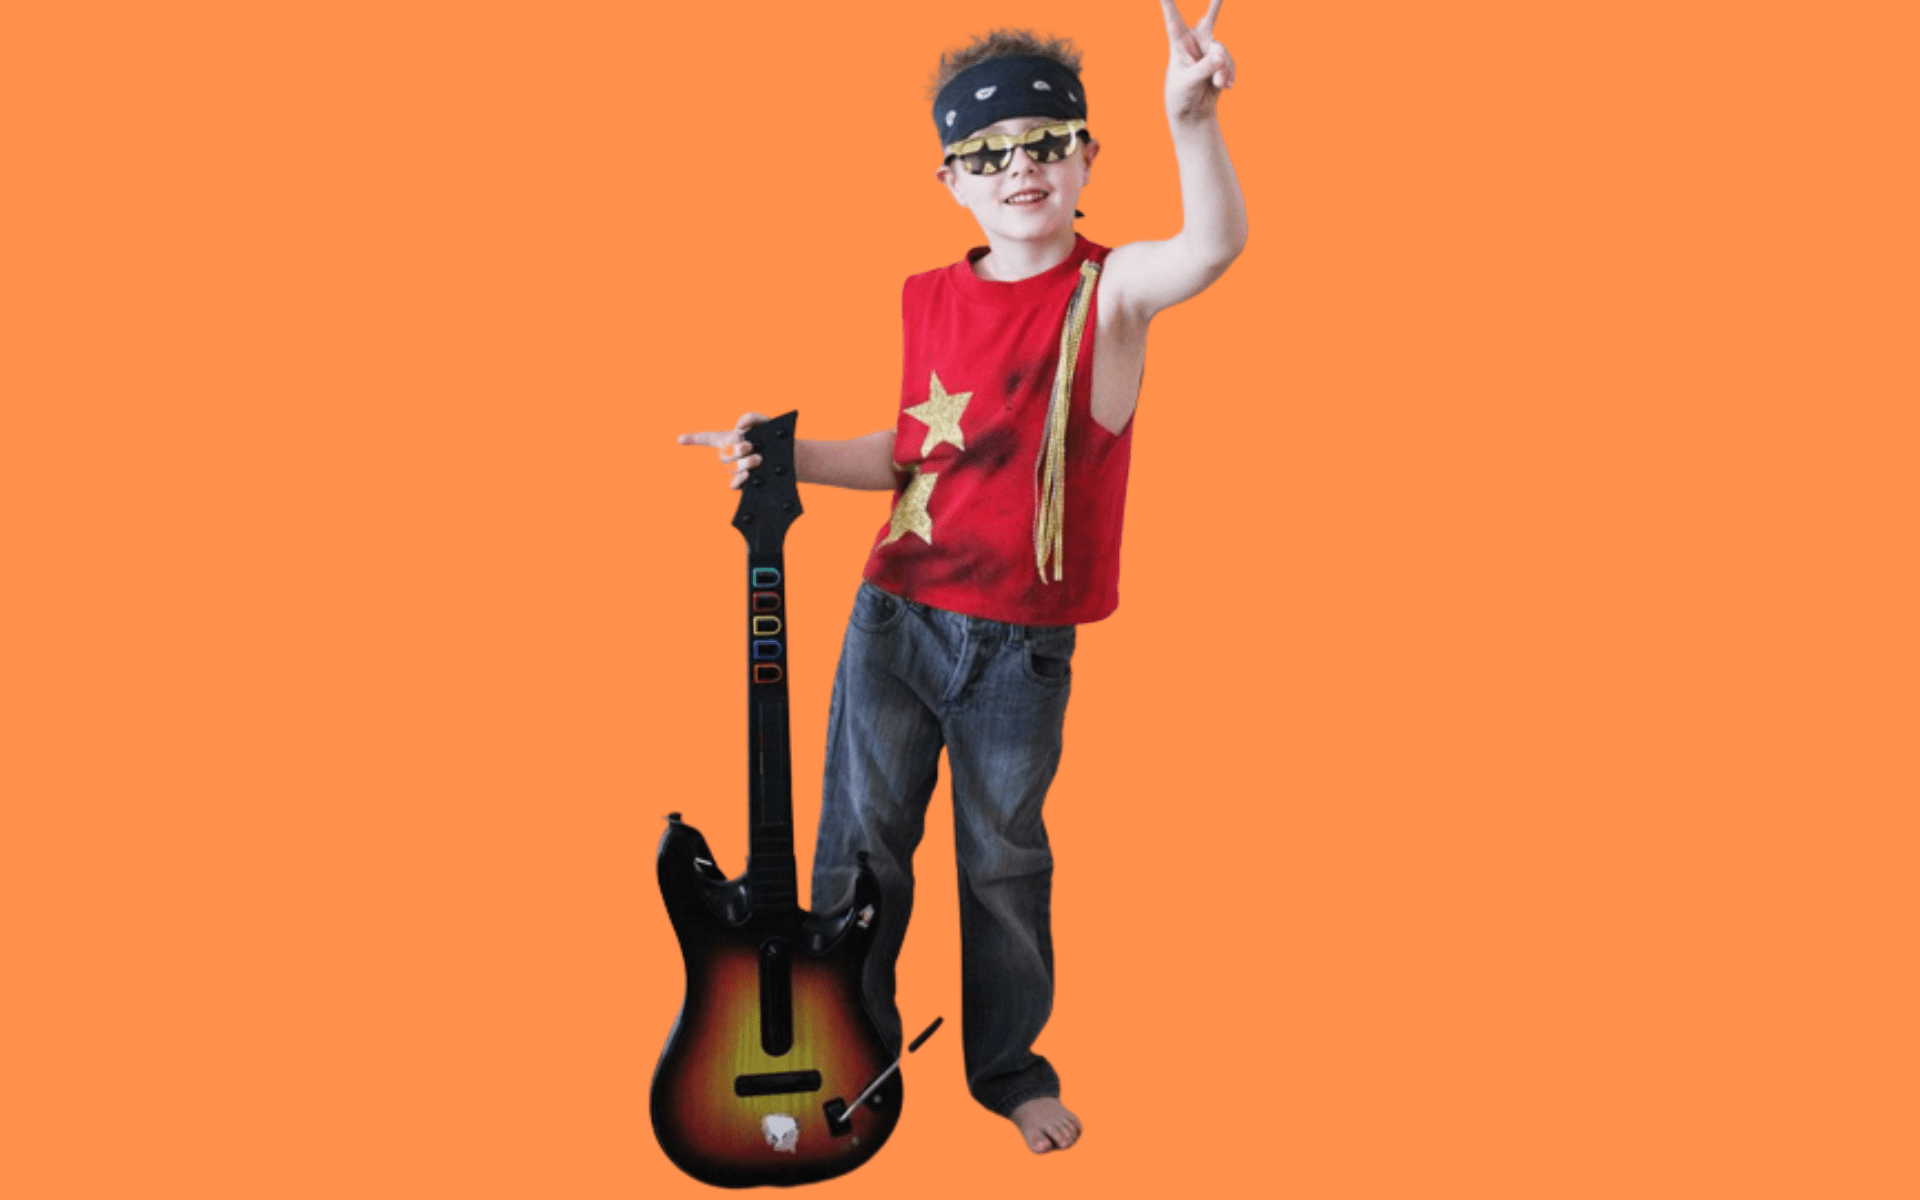 how to dress my toddler like a rockstar